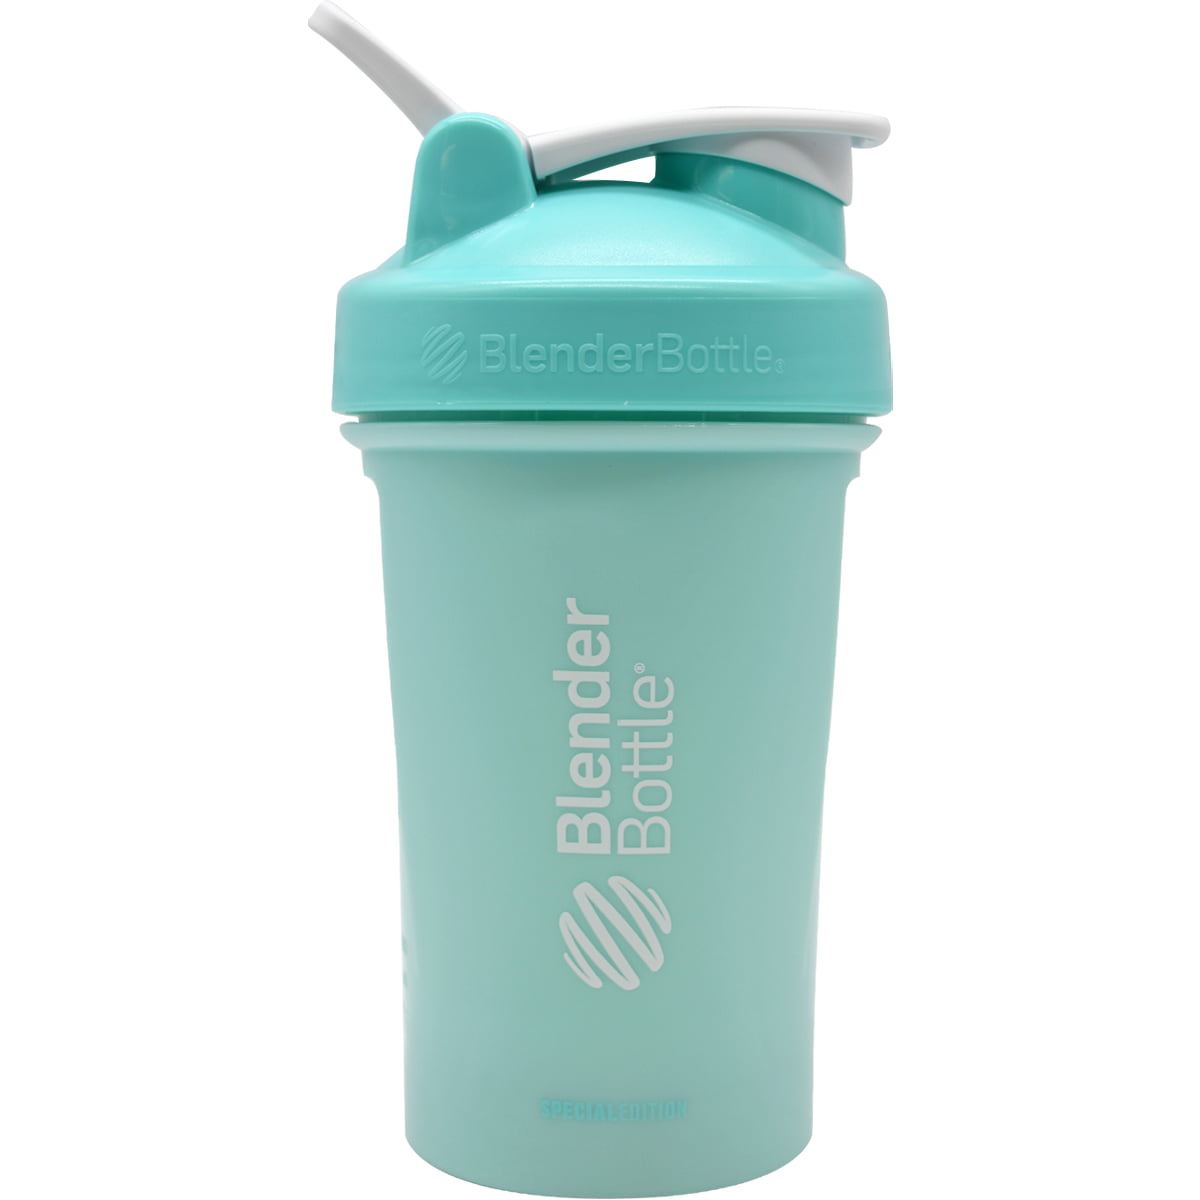 Blender Bottle Special Edition Classic 20 oz. Shaker Cup - Pina